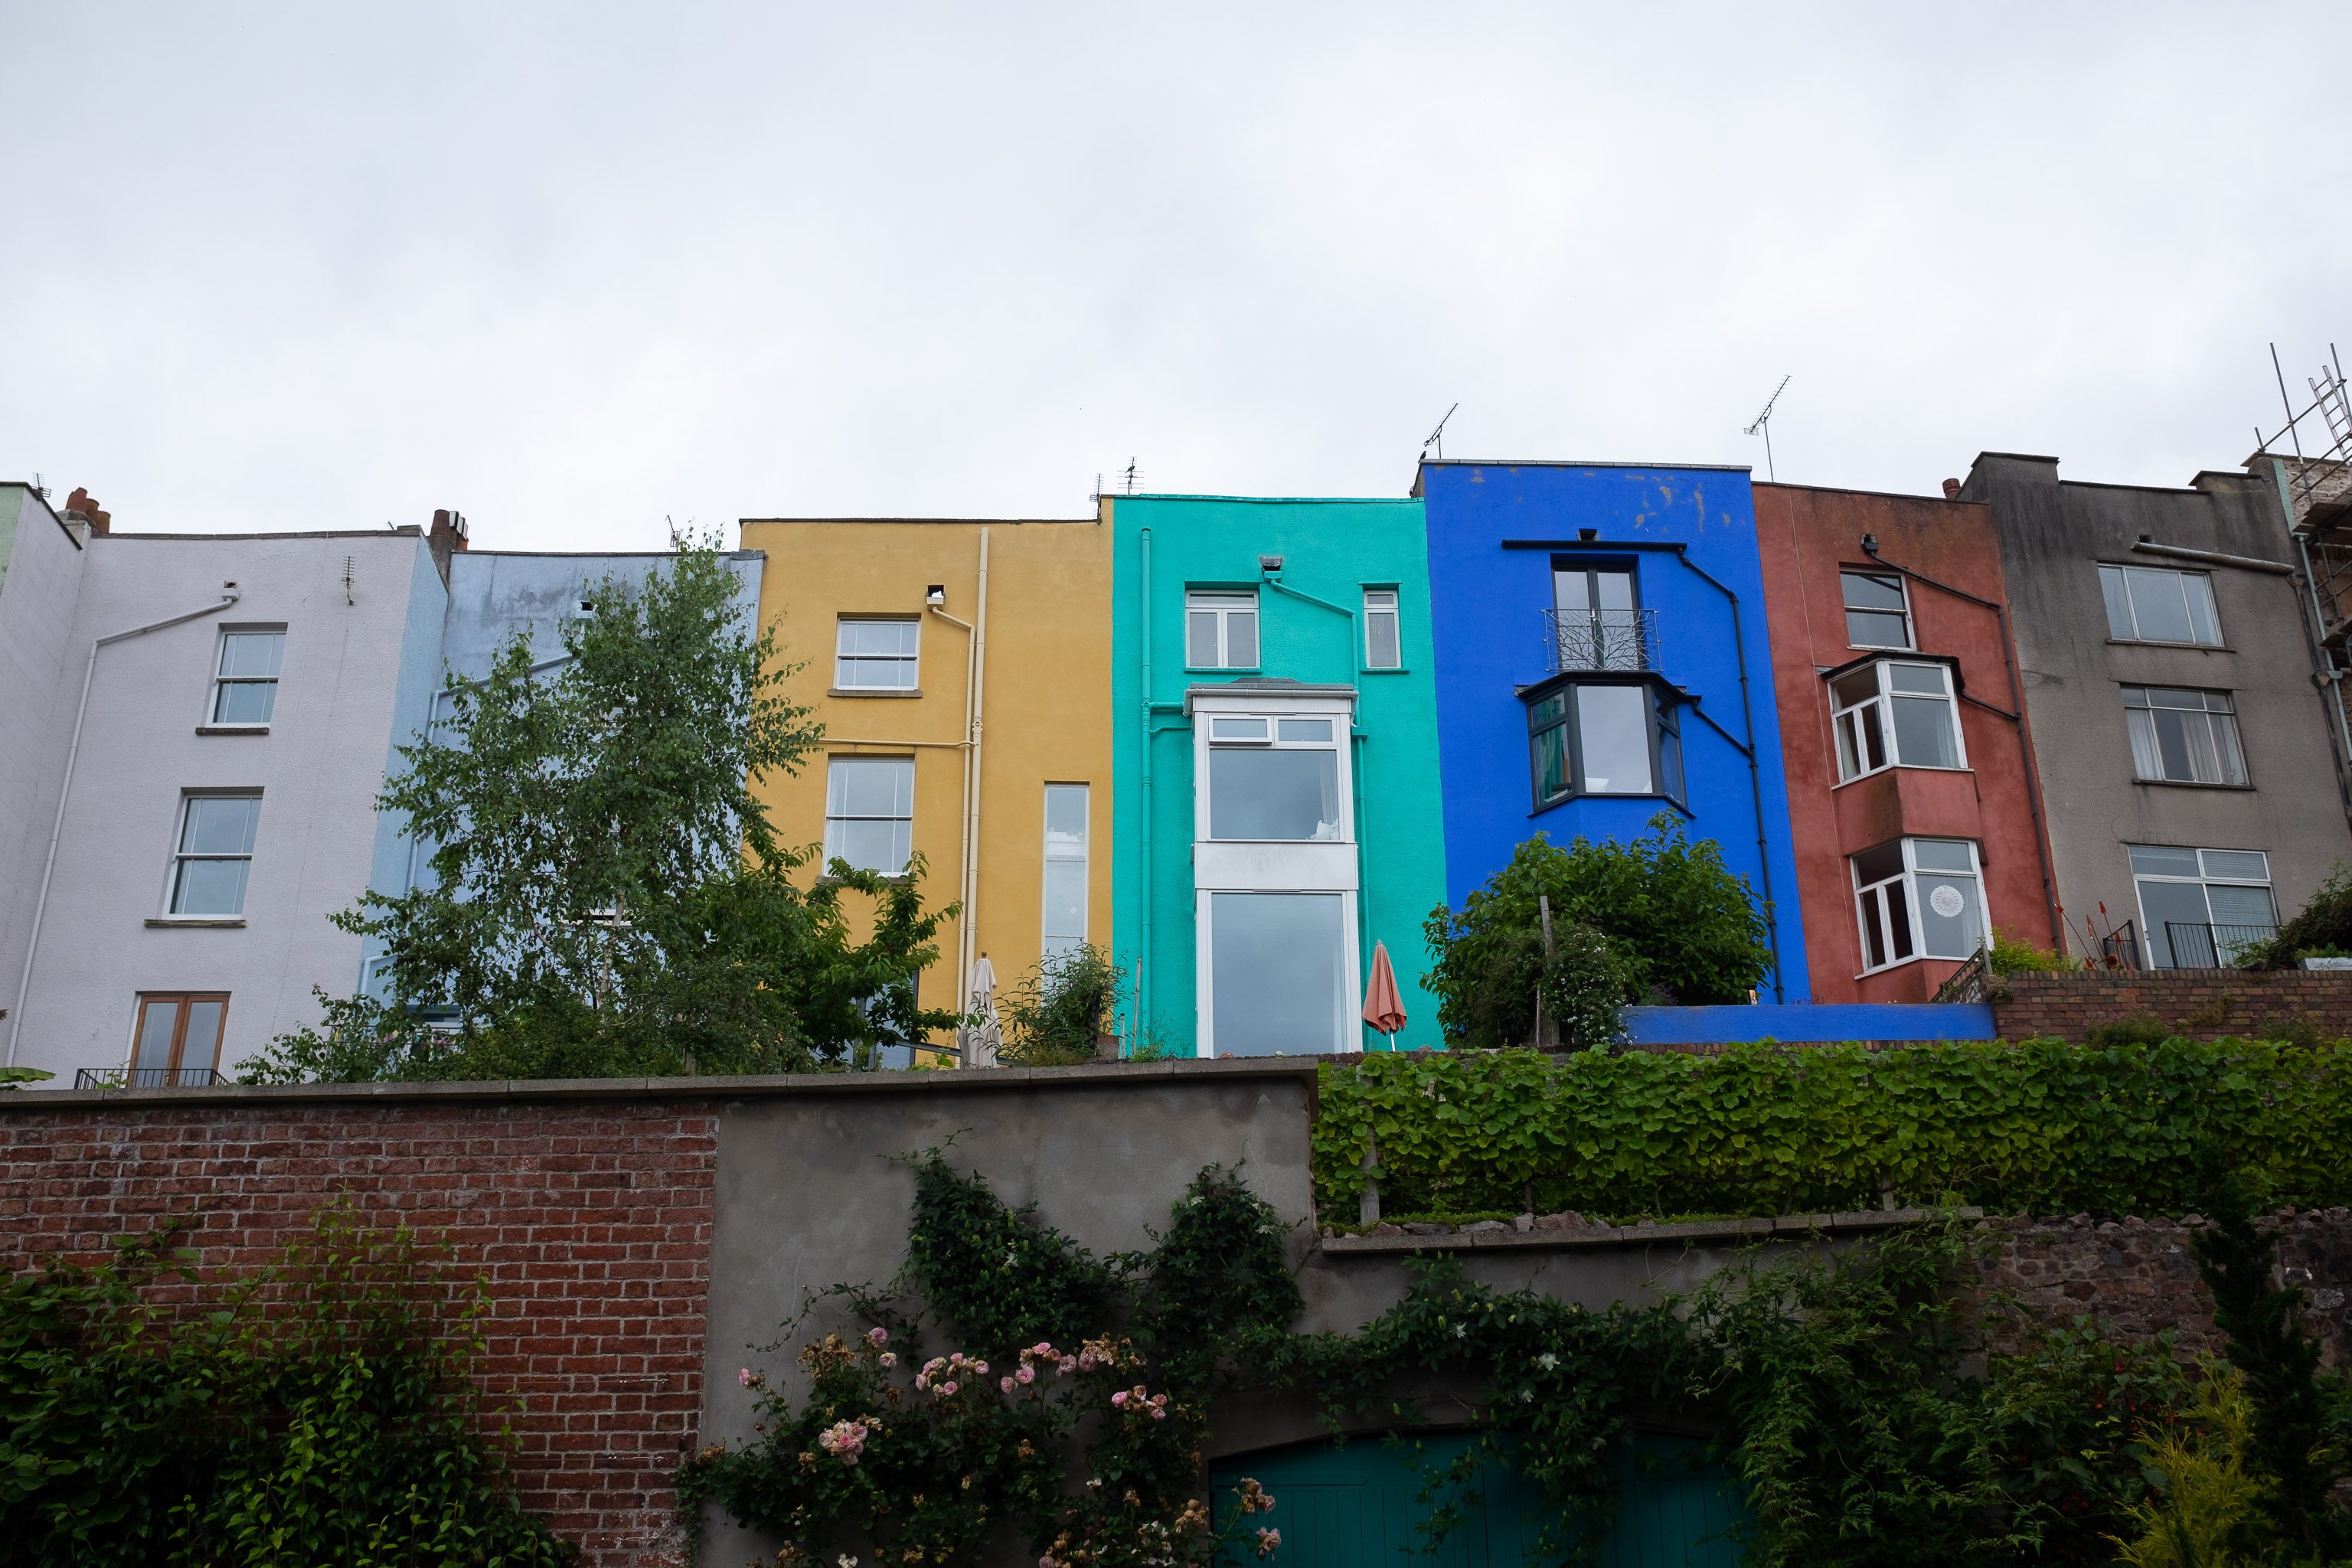 Varied
On a grey day at least the Cliftonwood houses still cheer things up a bit.
